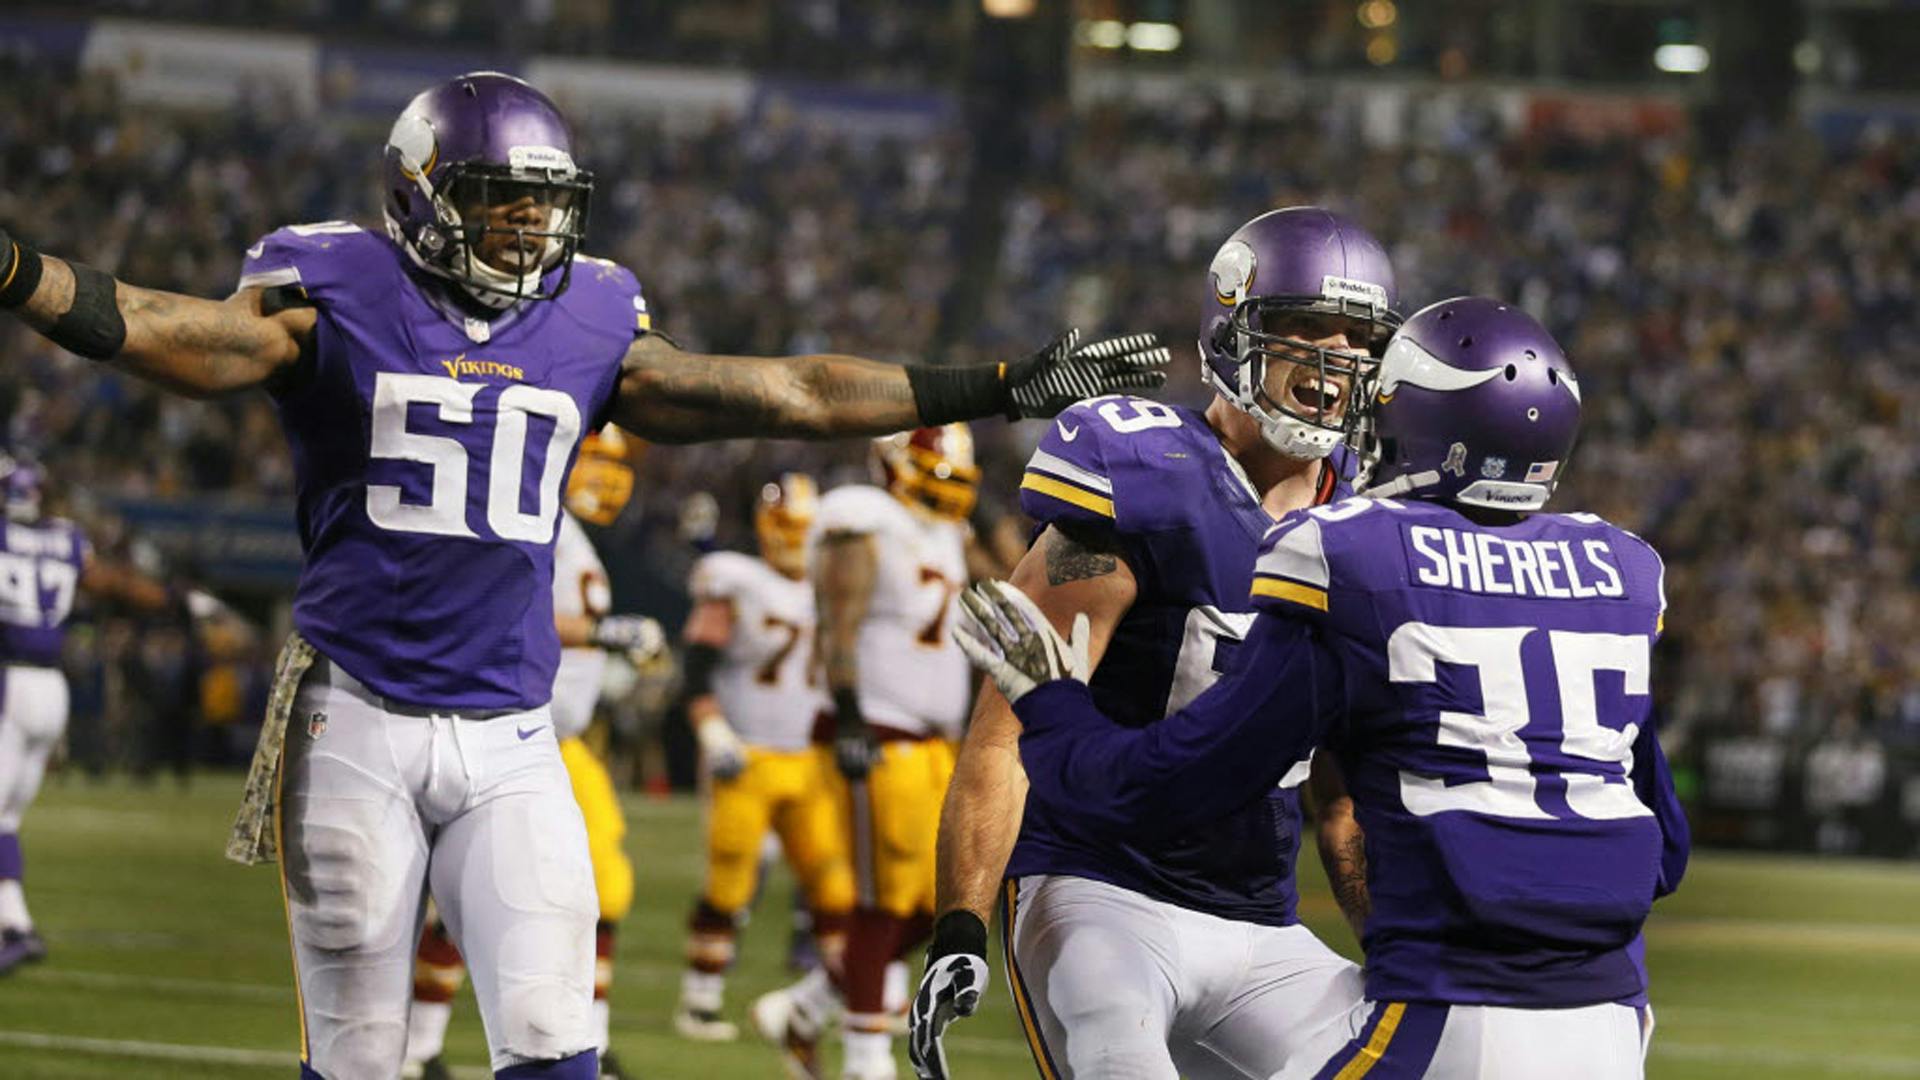 The Minnesota Vikings defeated the Washington Redskins 34-27, but starting quarterback Christian Ponder dislocated his left shoulder and did not finish the game.